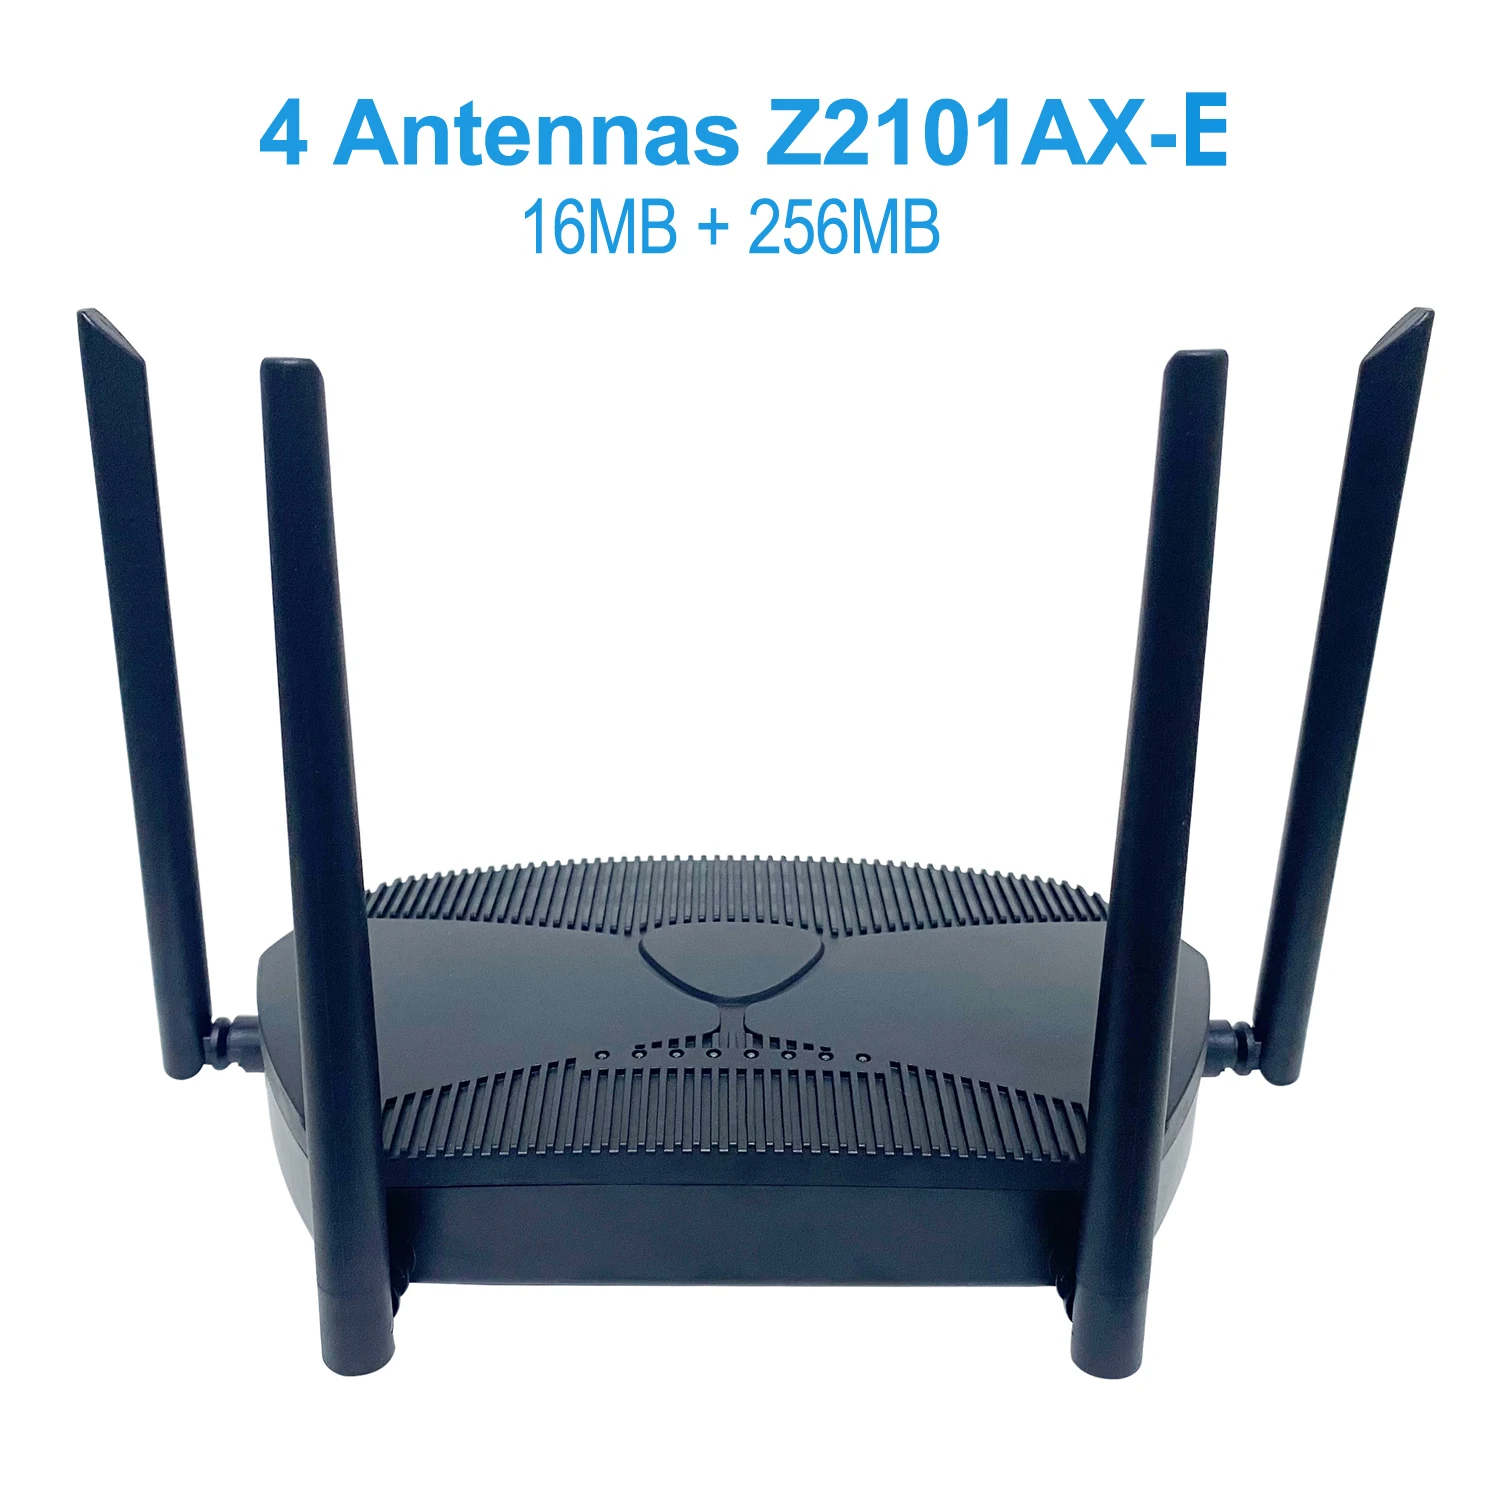 gigabit-wifi-router-openwrt-3000mbps-wifi6-58ghz-for-home-128-user-128mb-flash-256mb-ram-4-lan-hotspot-4t4r-mu-mimo-antenna